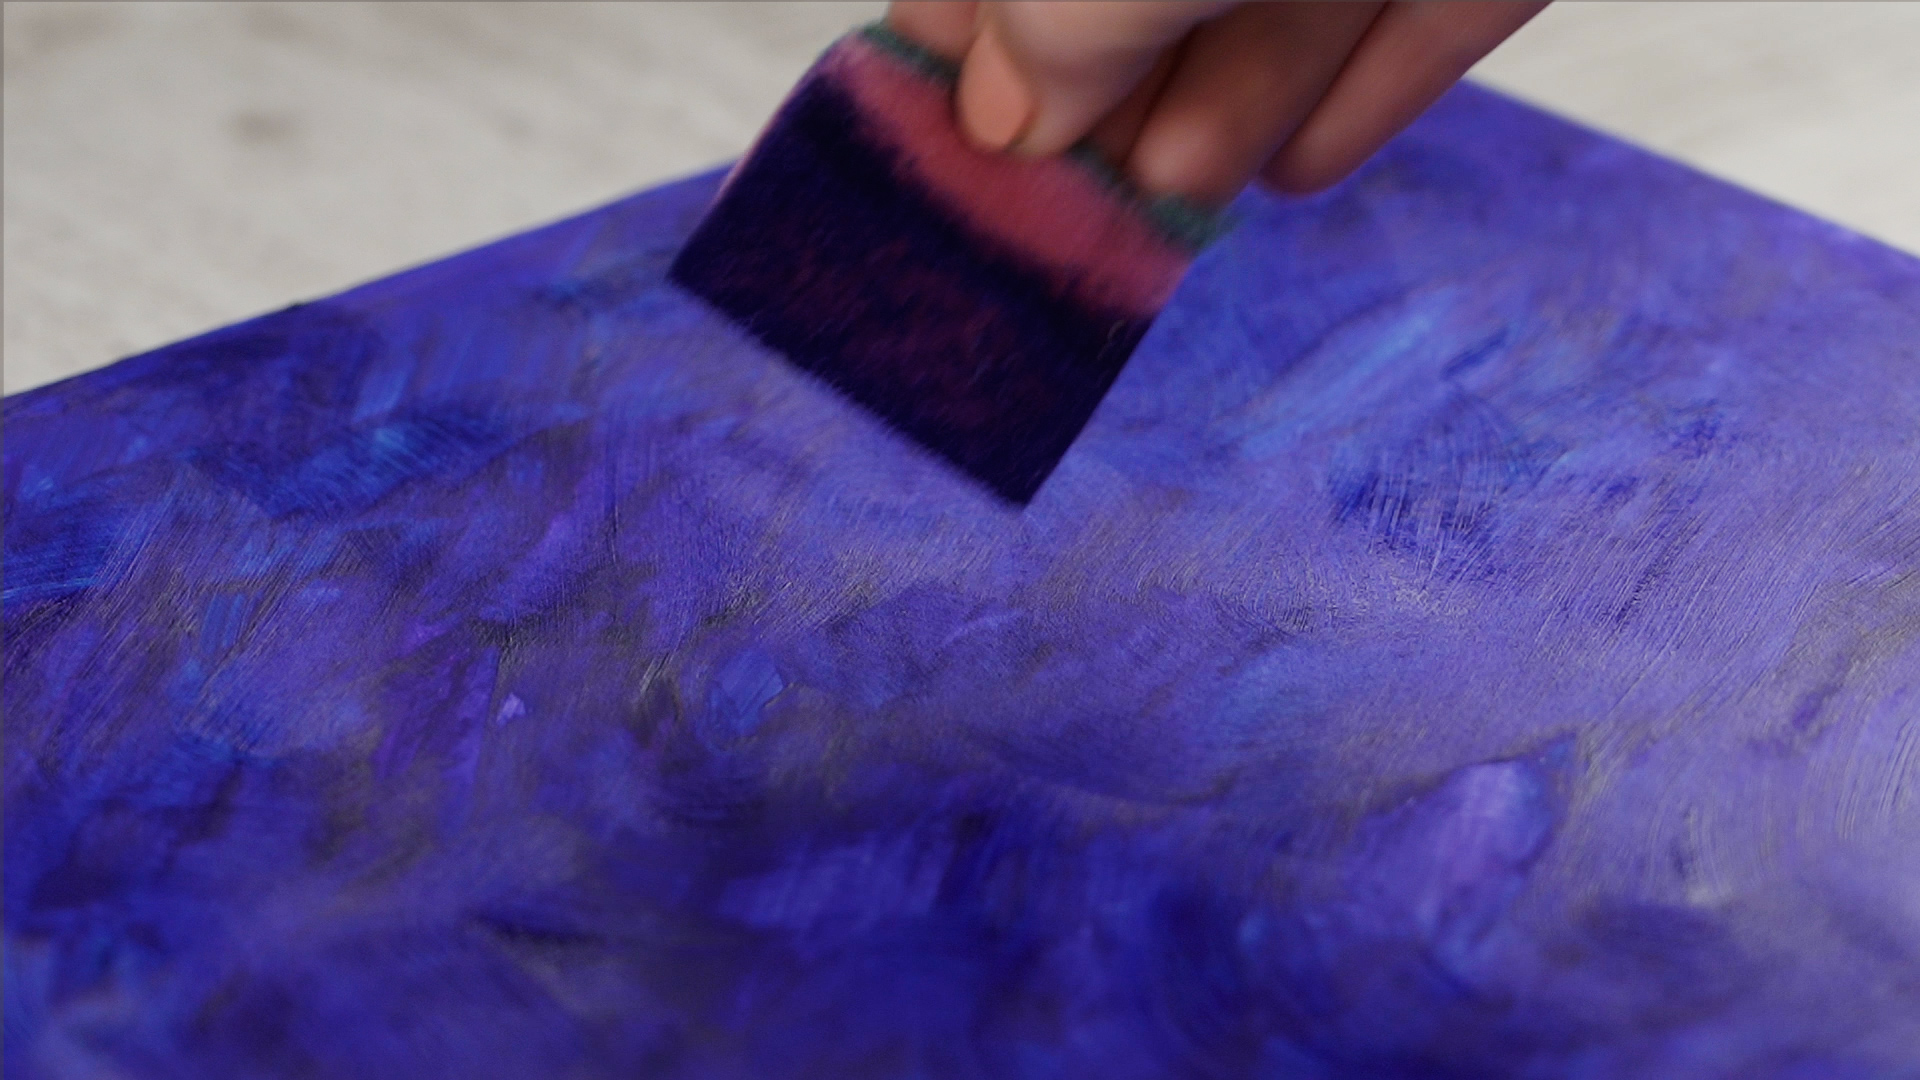 Take the sponge and apply it to the paper to create a texture.